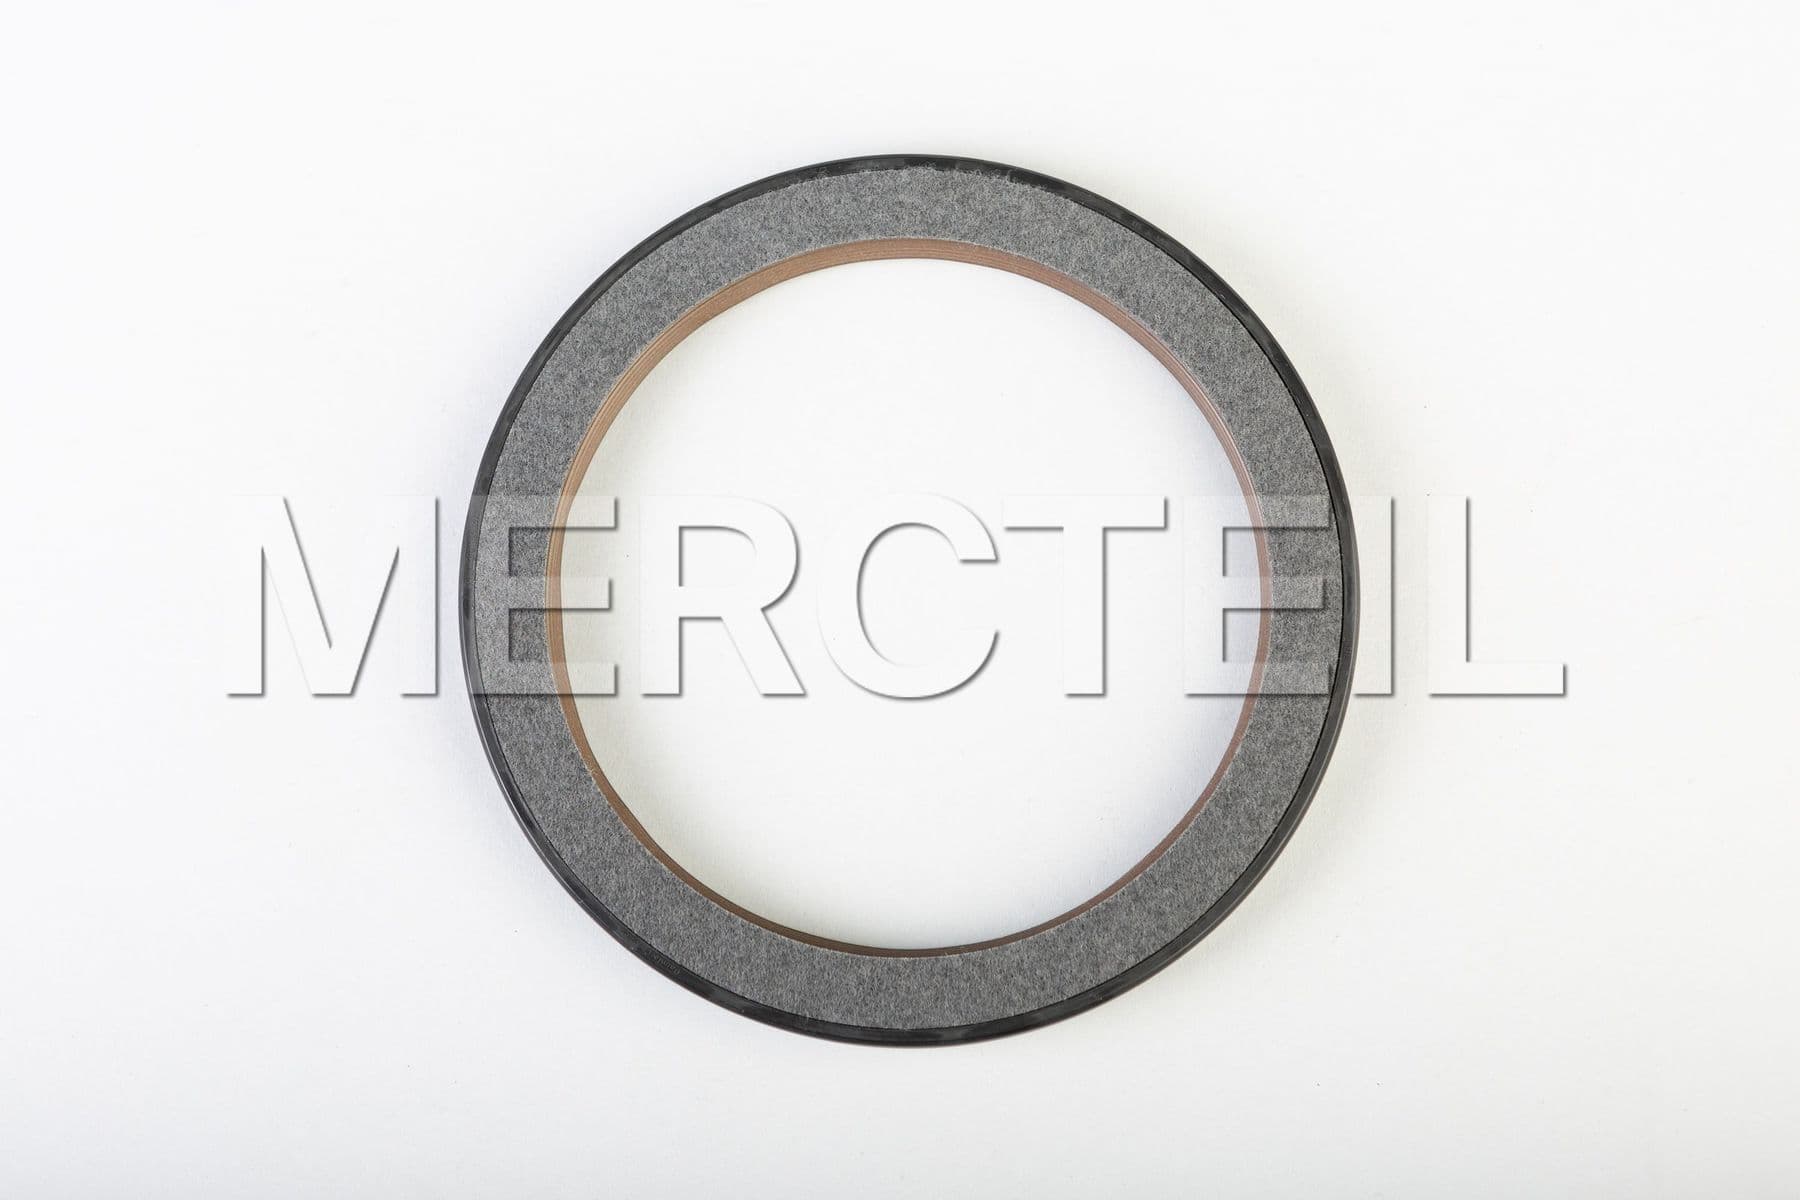 Buy the spare part Mercedes-Benz A0259975047 sealing ring